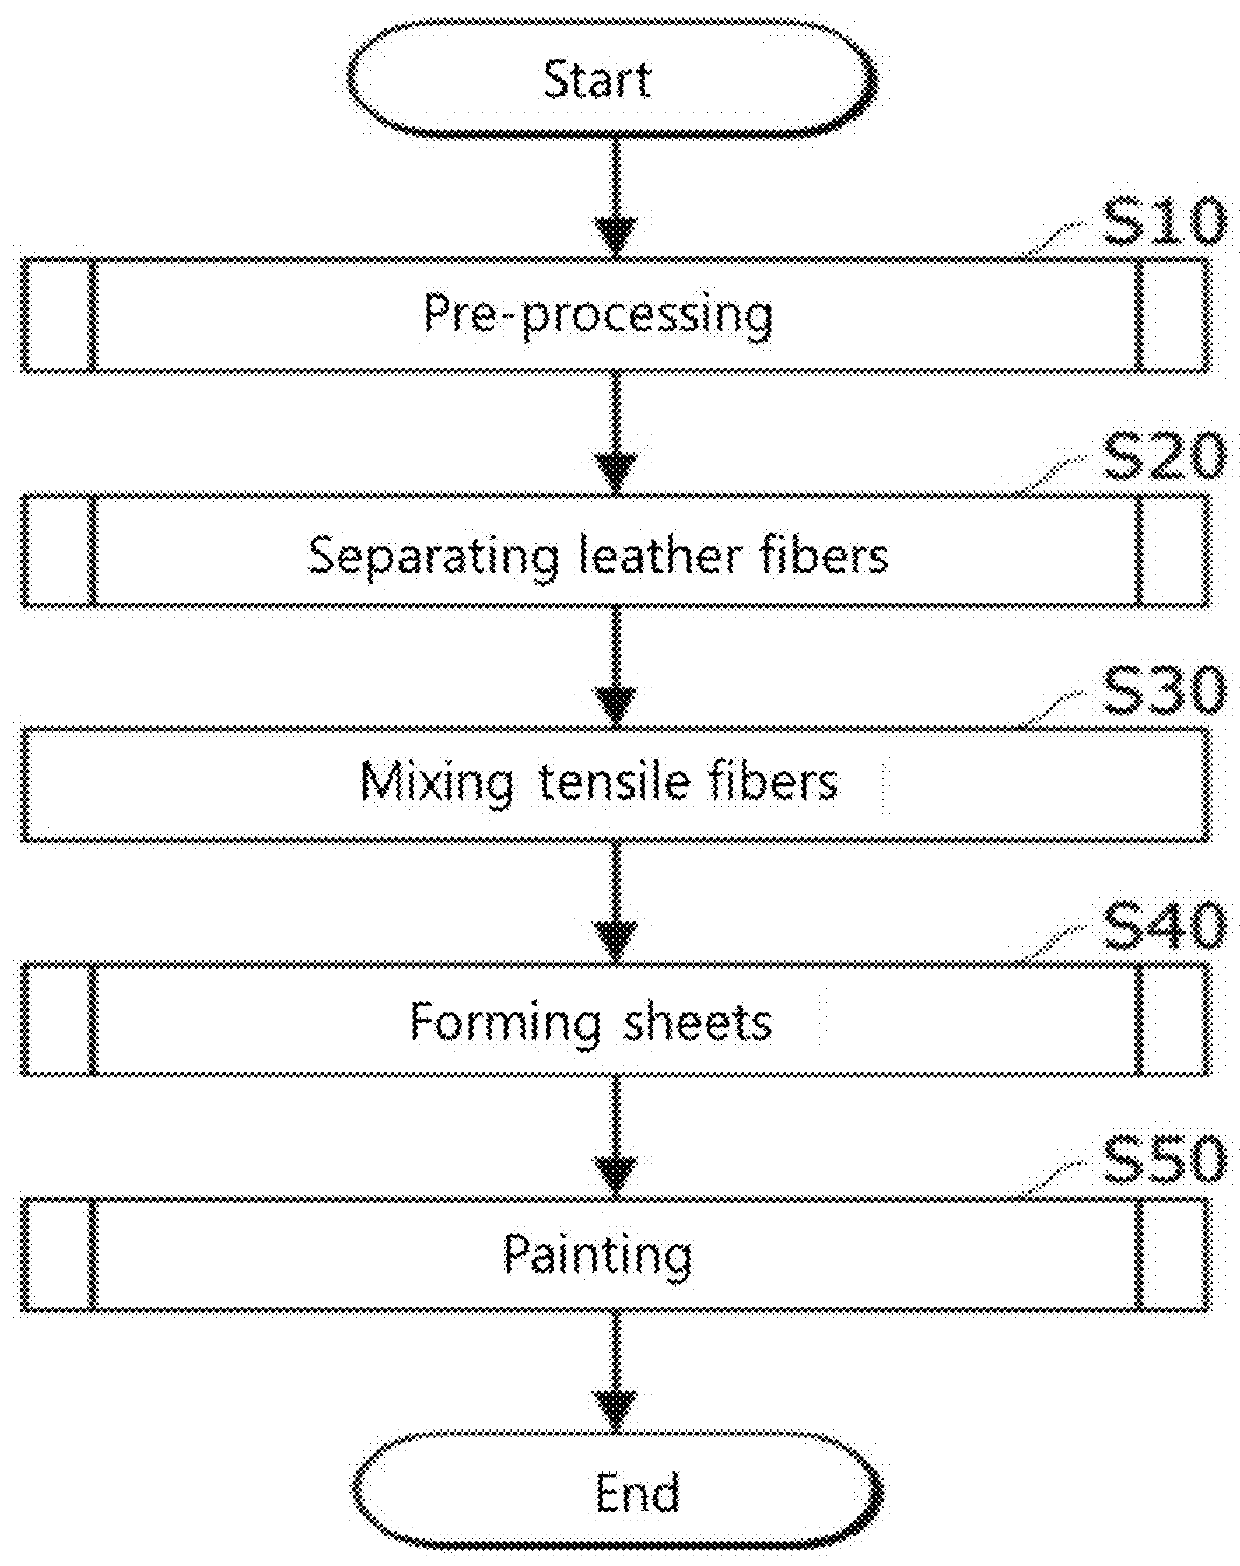 Manufacturing method of recycling leather sheet using fiber of leather